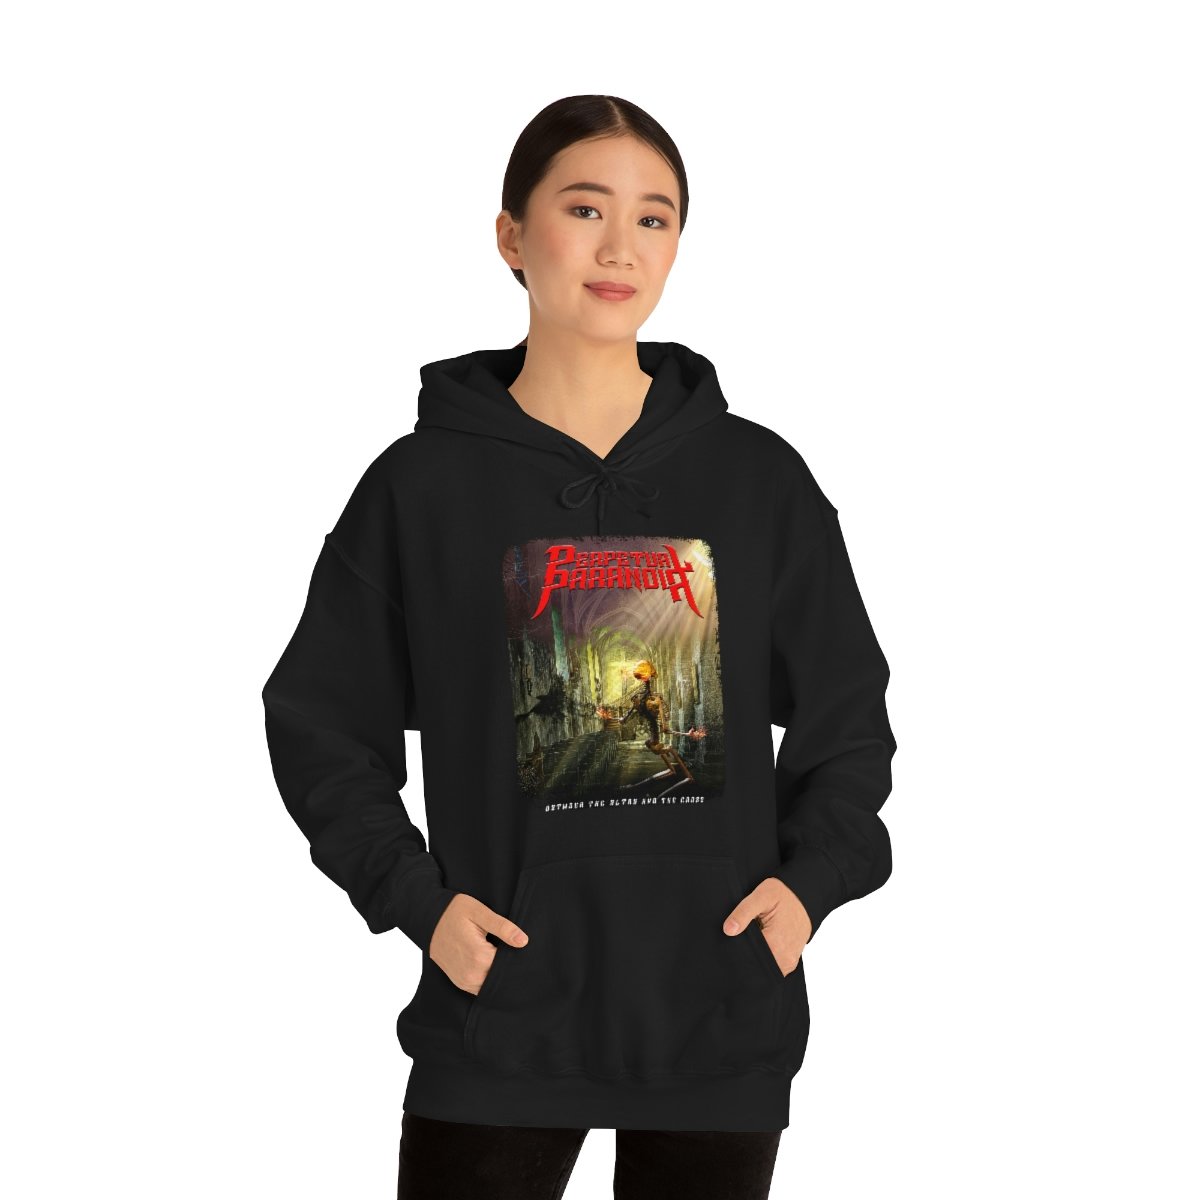 Perpetual Paranoia – Between the Altar And the Cross Pullover Hooded Sweatshirt